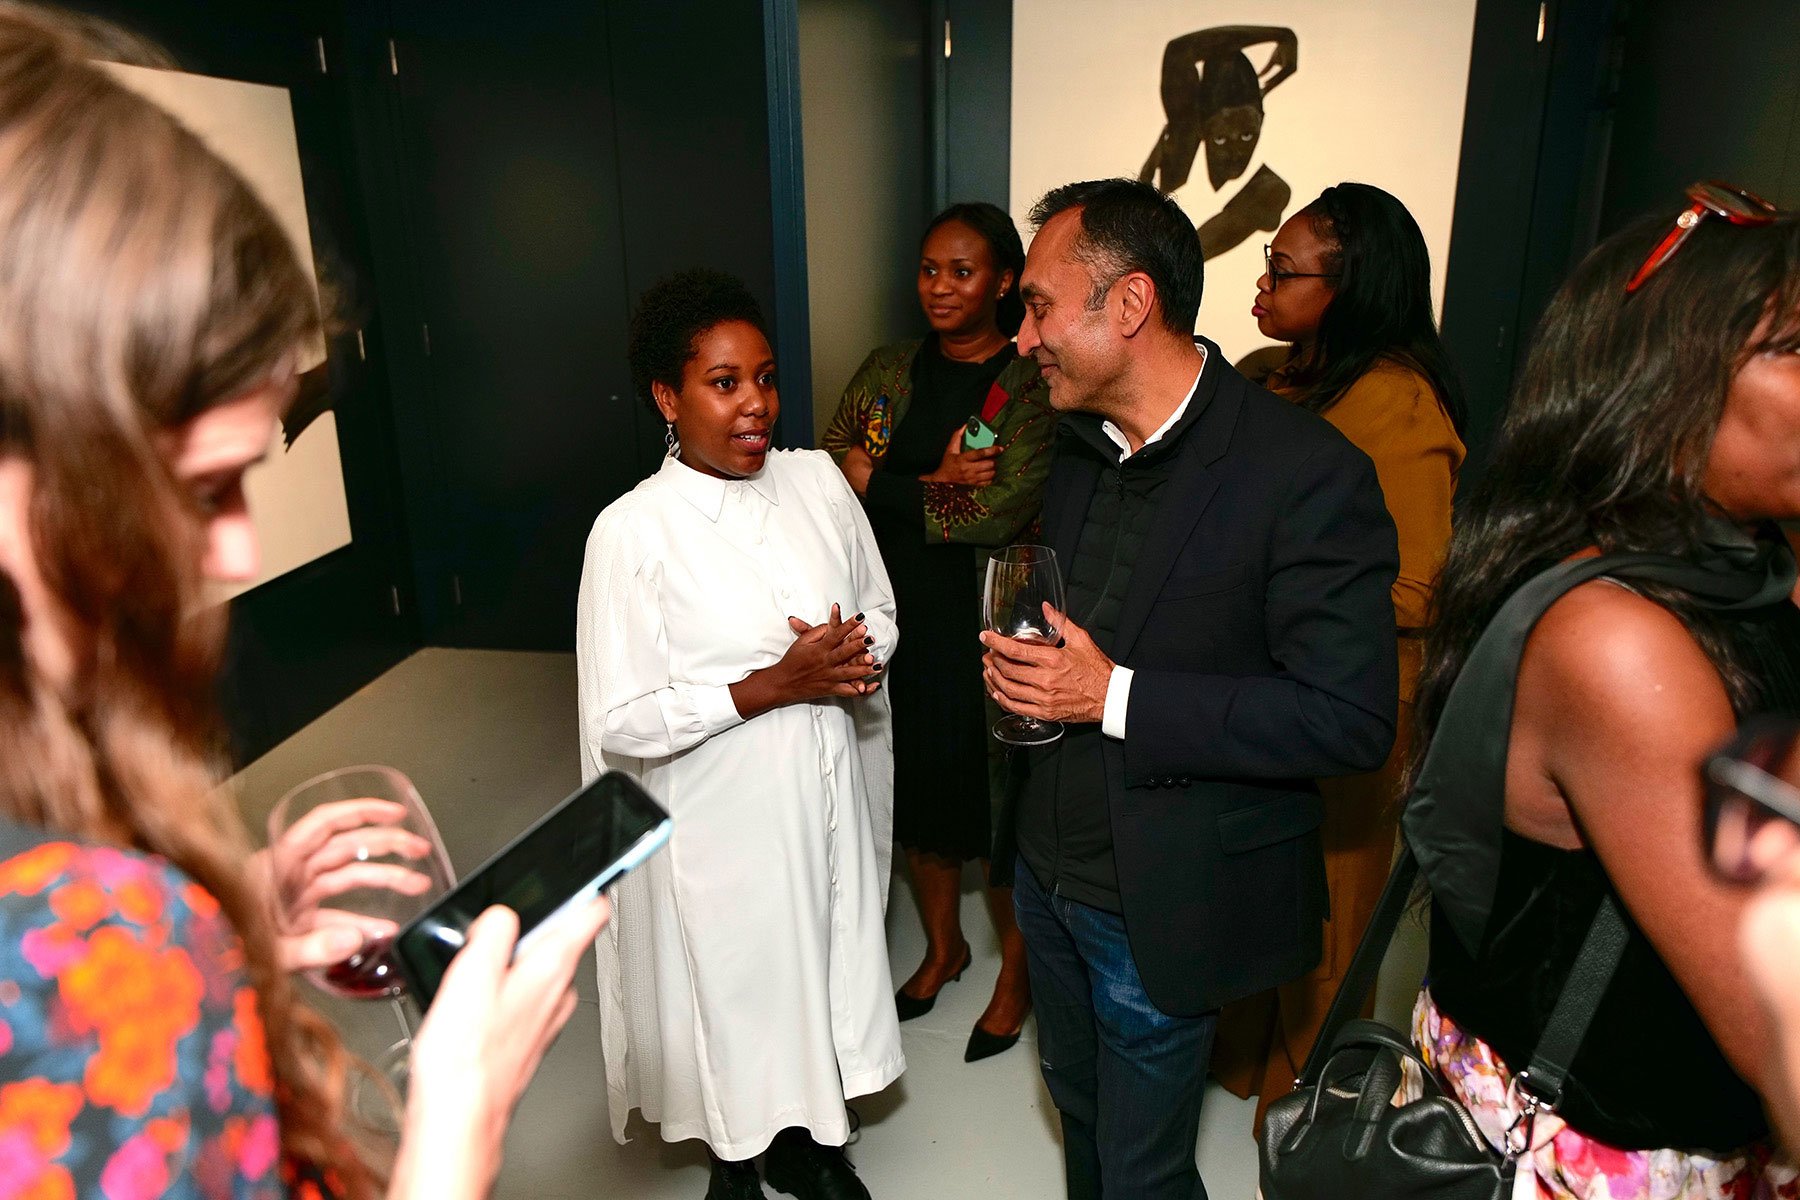 Sungi-Mlengeya-with-audience-at-her-inagural-solo-exhibition-that-marked-the-opening-of-the-Africa-Centre-in-Southwark-London.jpg